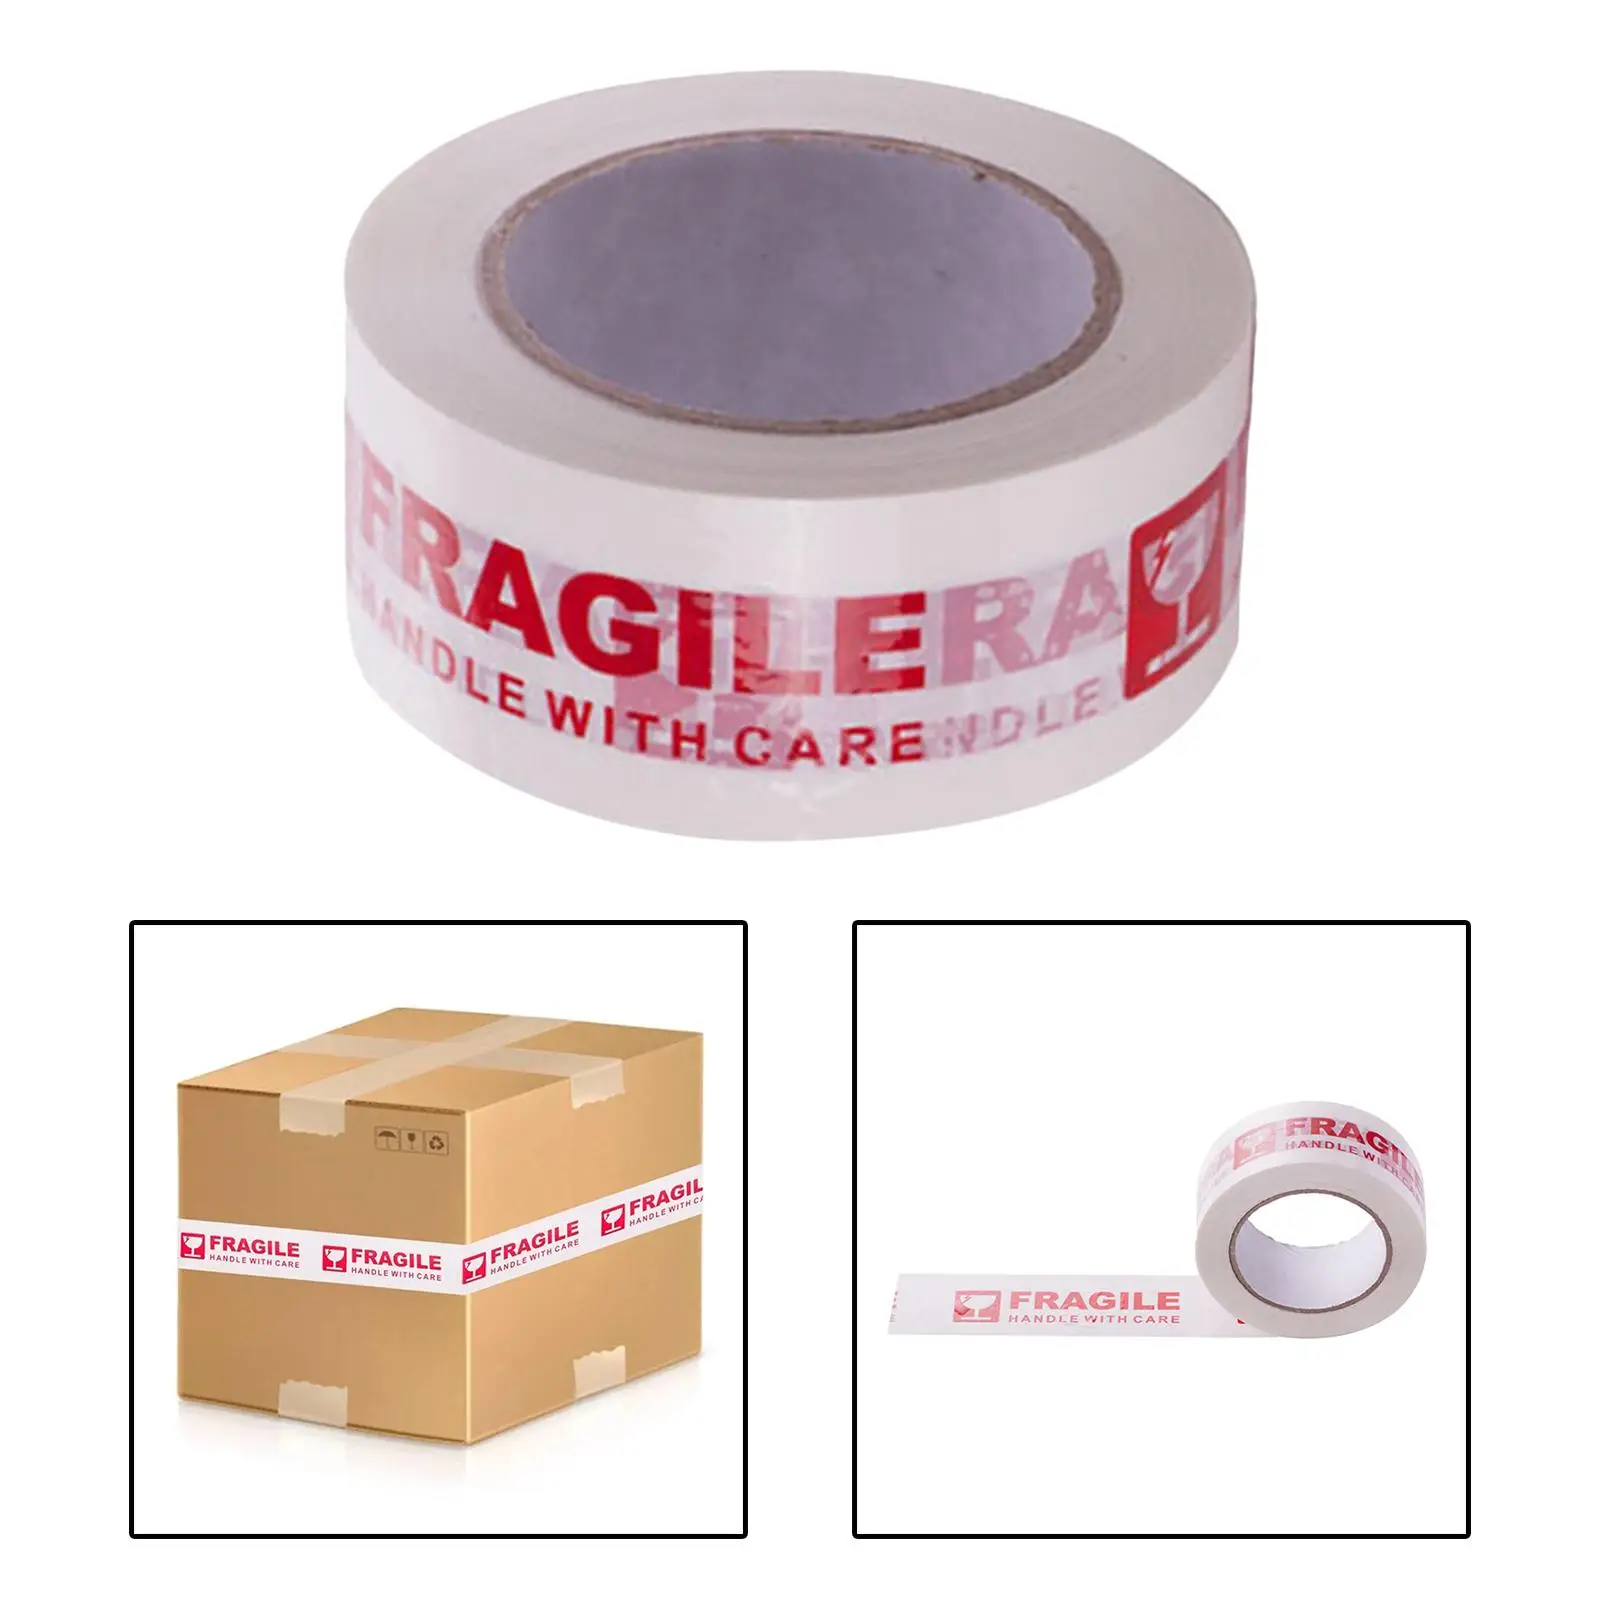 Fragile Handle with Care Packing Shipping Carton Box Sealing Tape